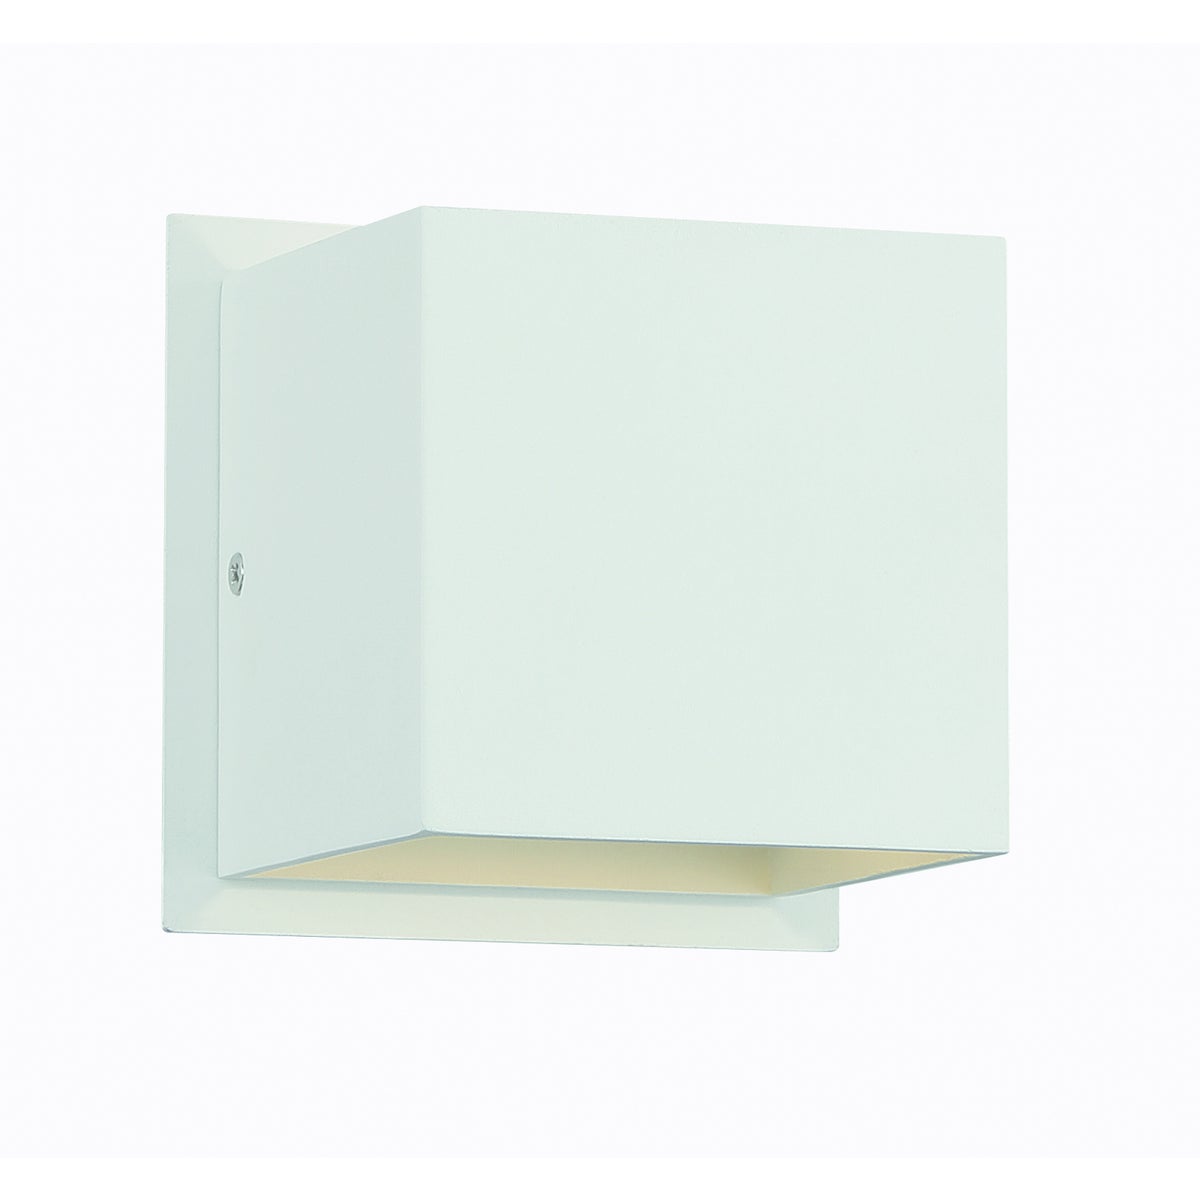 Louis Wall Sconce in White Matte